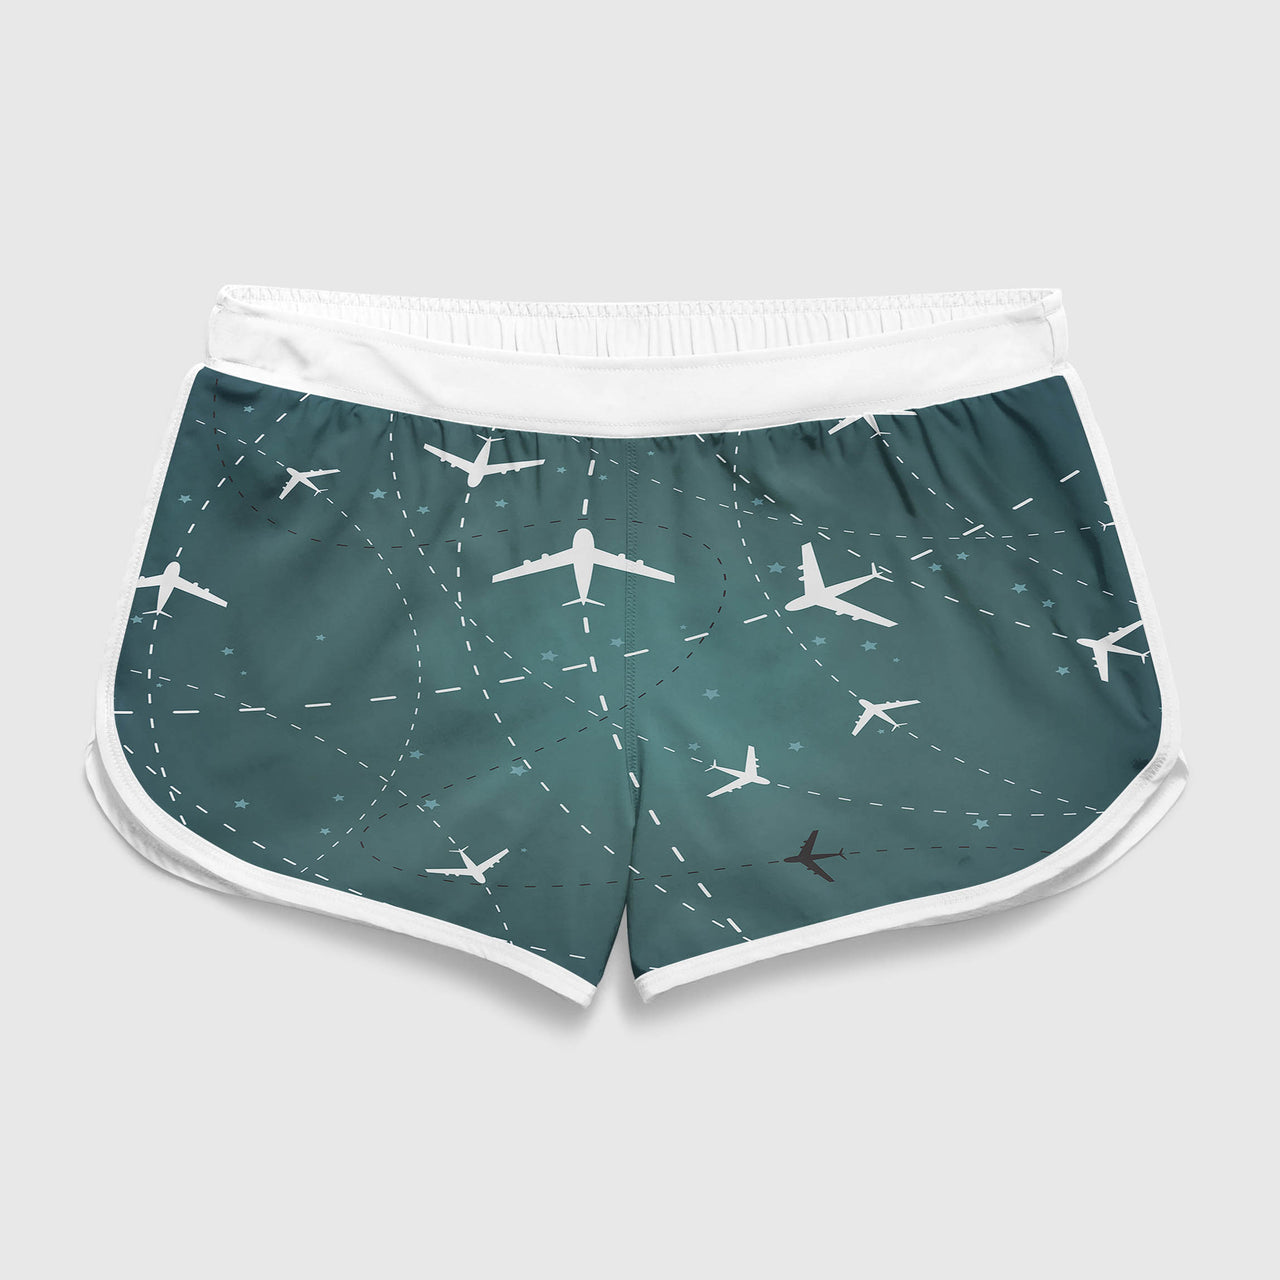 Travelling with Aircraft (Green) Designed Women Beach Style Shorts